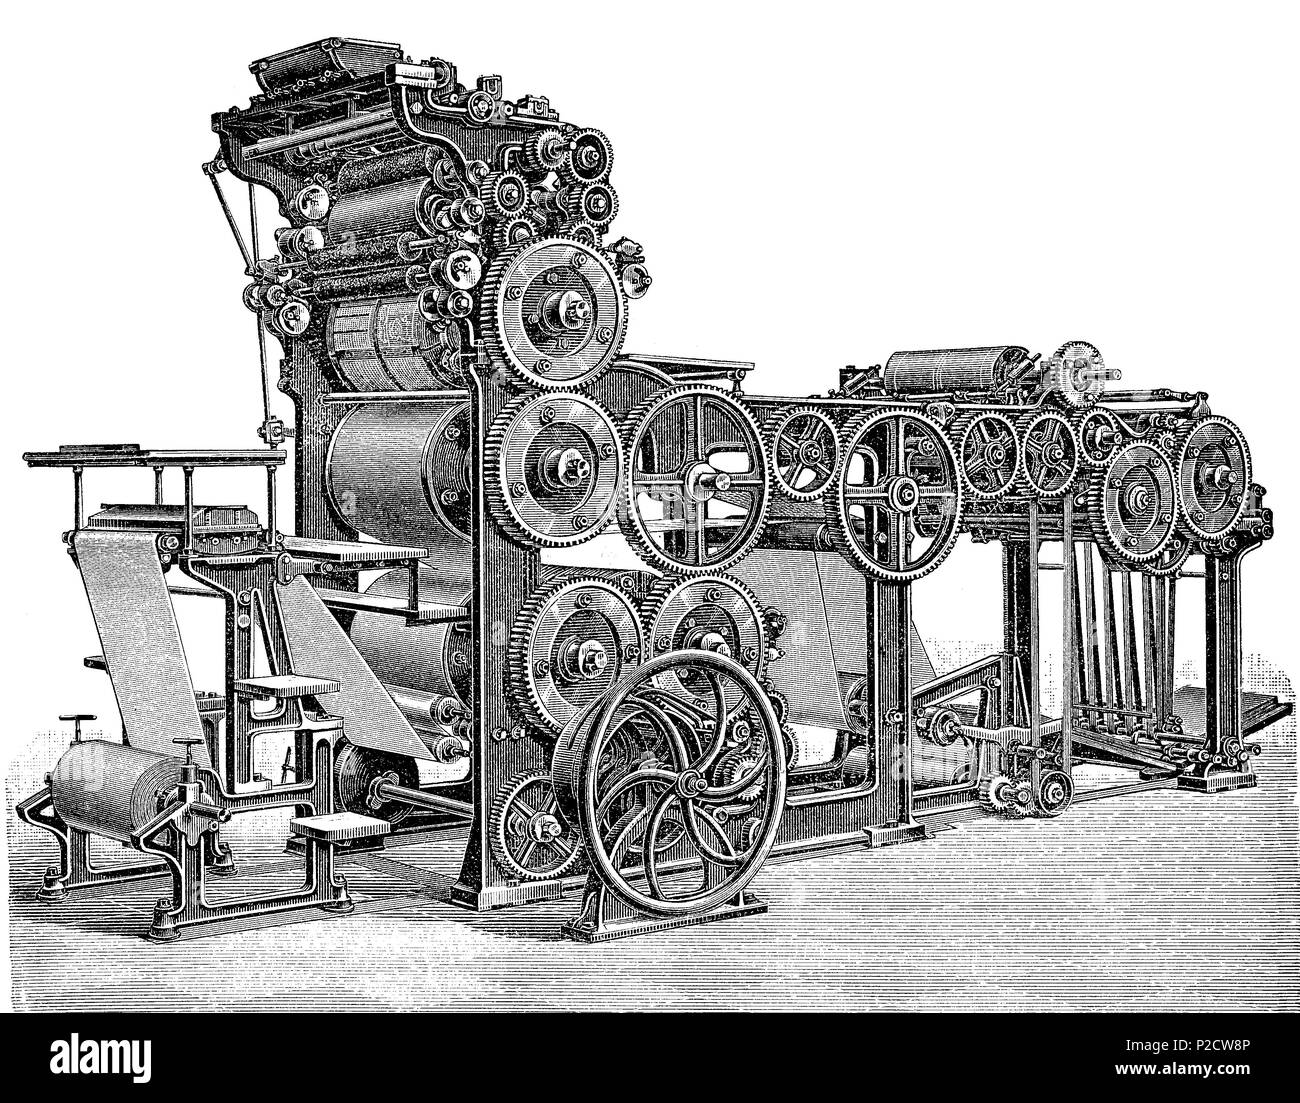 'rotary press from Marinoni, Marinoni press from 1883, Hippolyte Auguste Marinoni, 1823 - 1904, was a builder of rotary printing presses; most of which used the rotogravure process', digital improved reproduction from an original print from the 19th century, 1881 Stock Photo